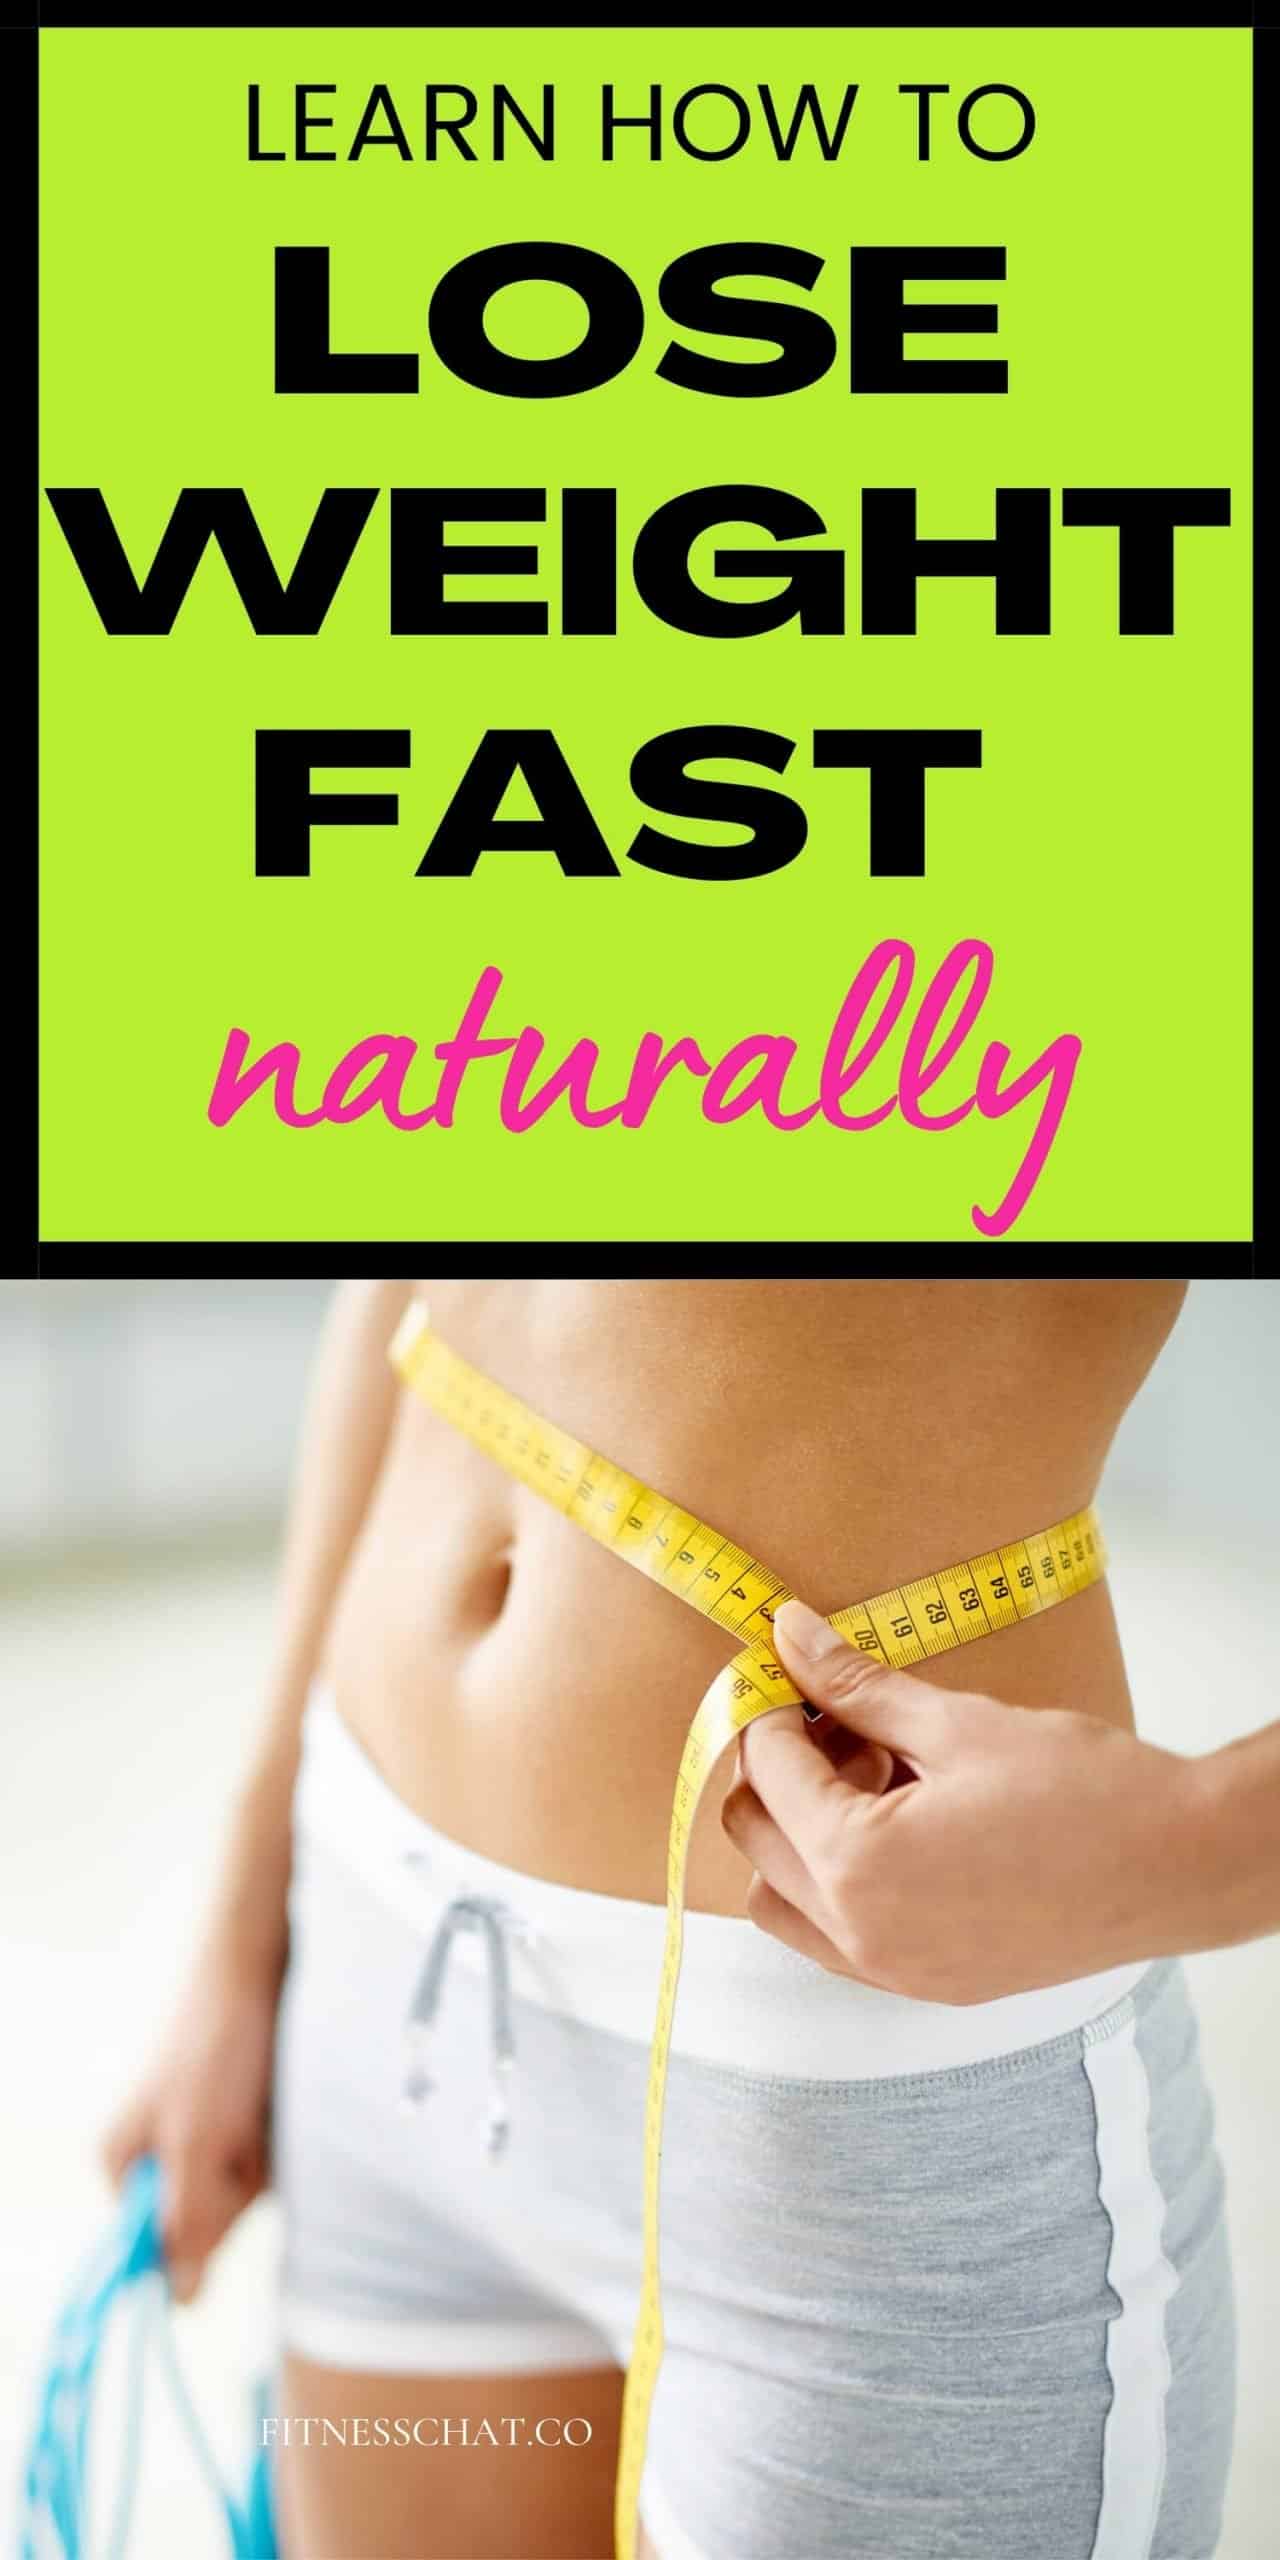 lose weight tips - how to lose weight fast naturally 